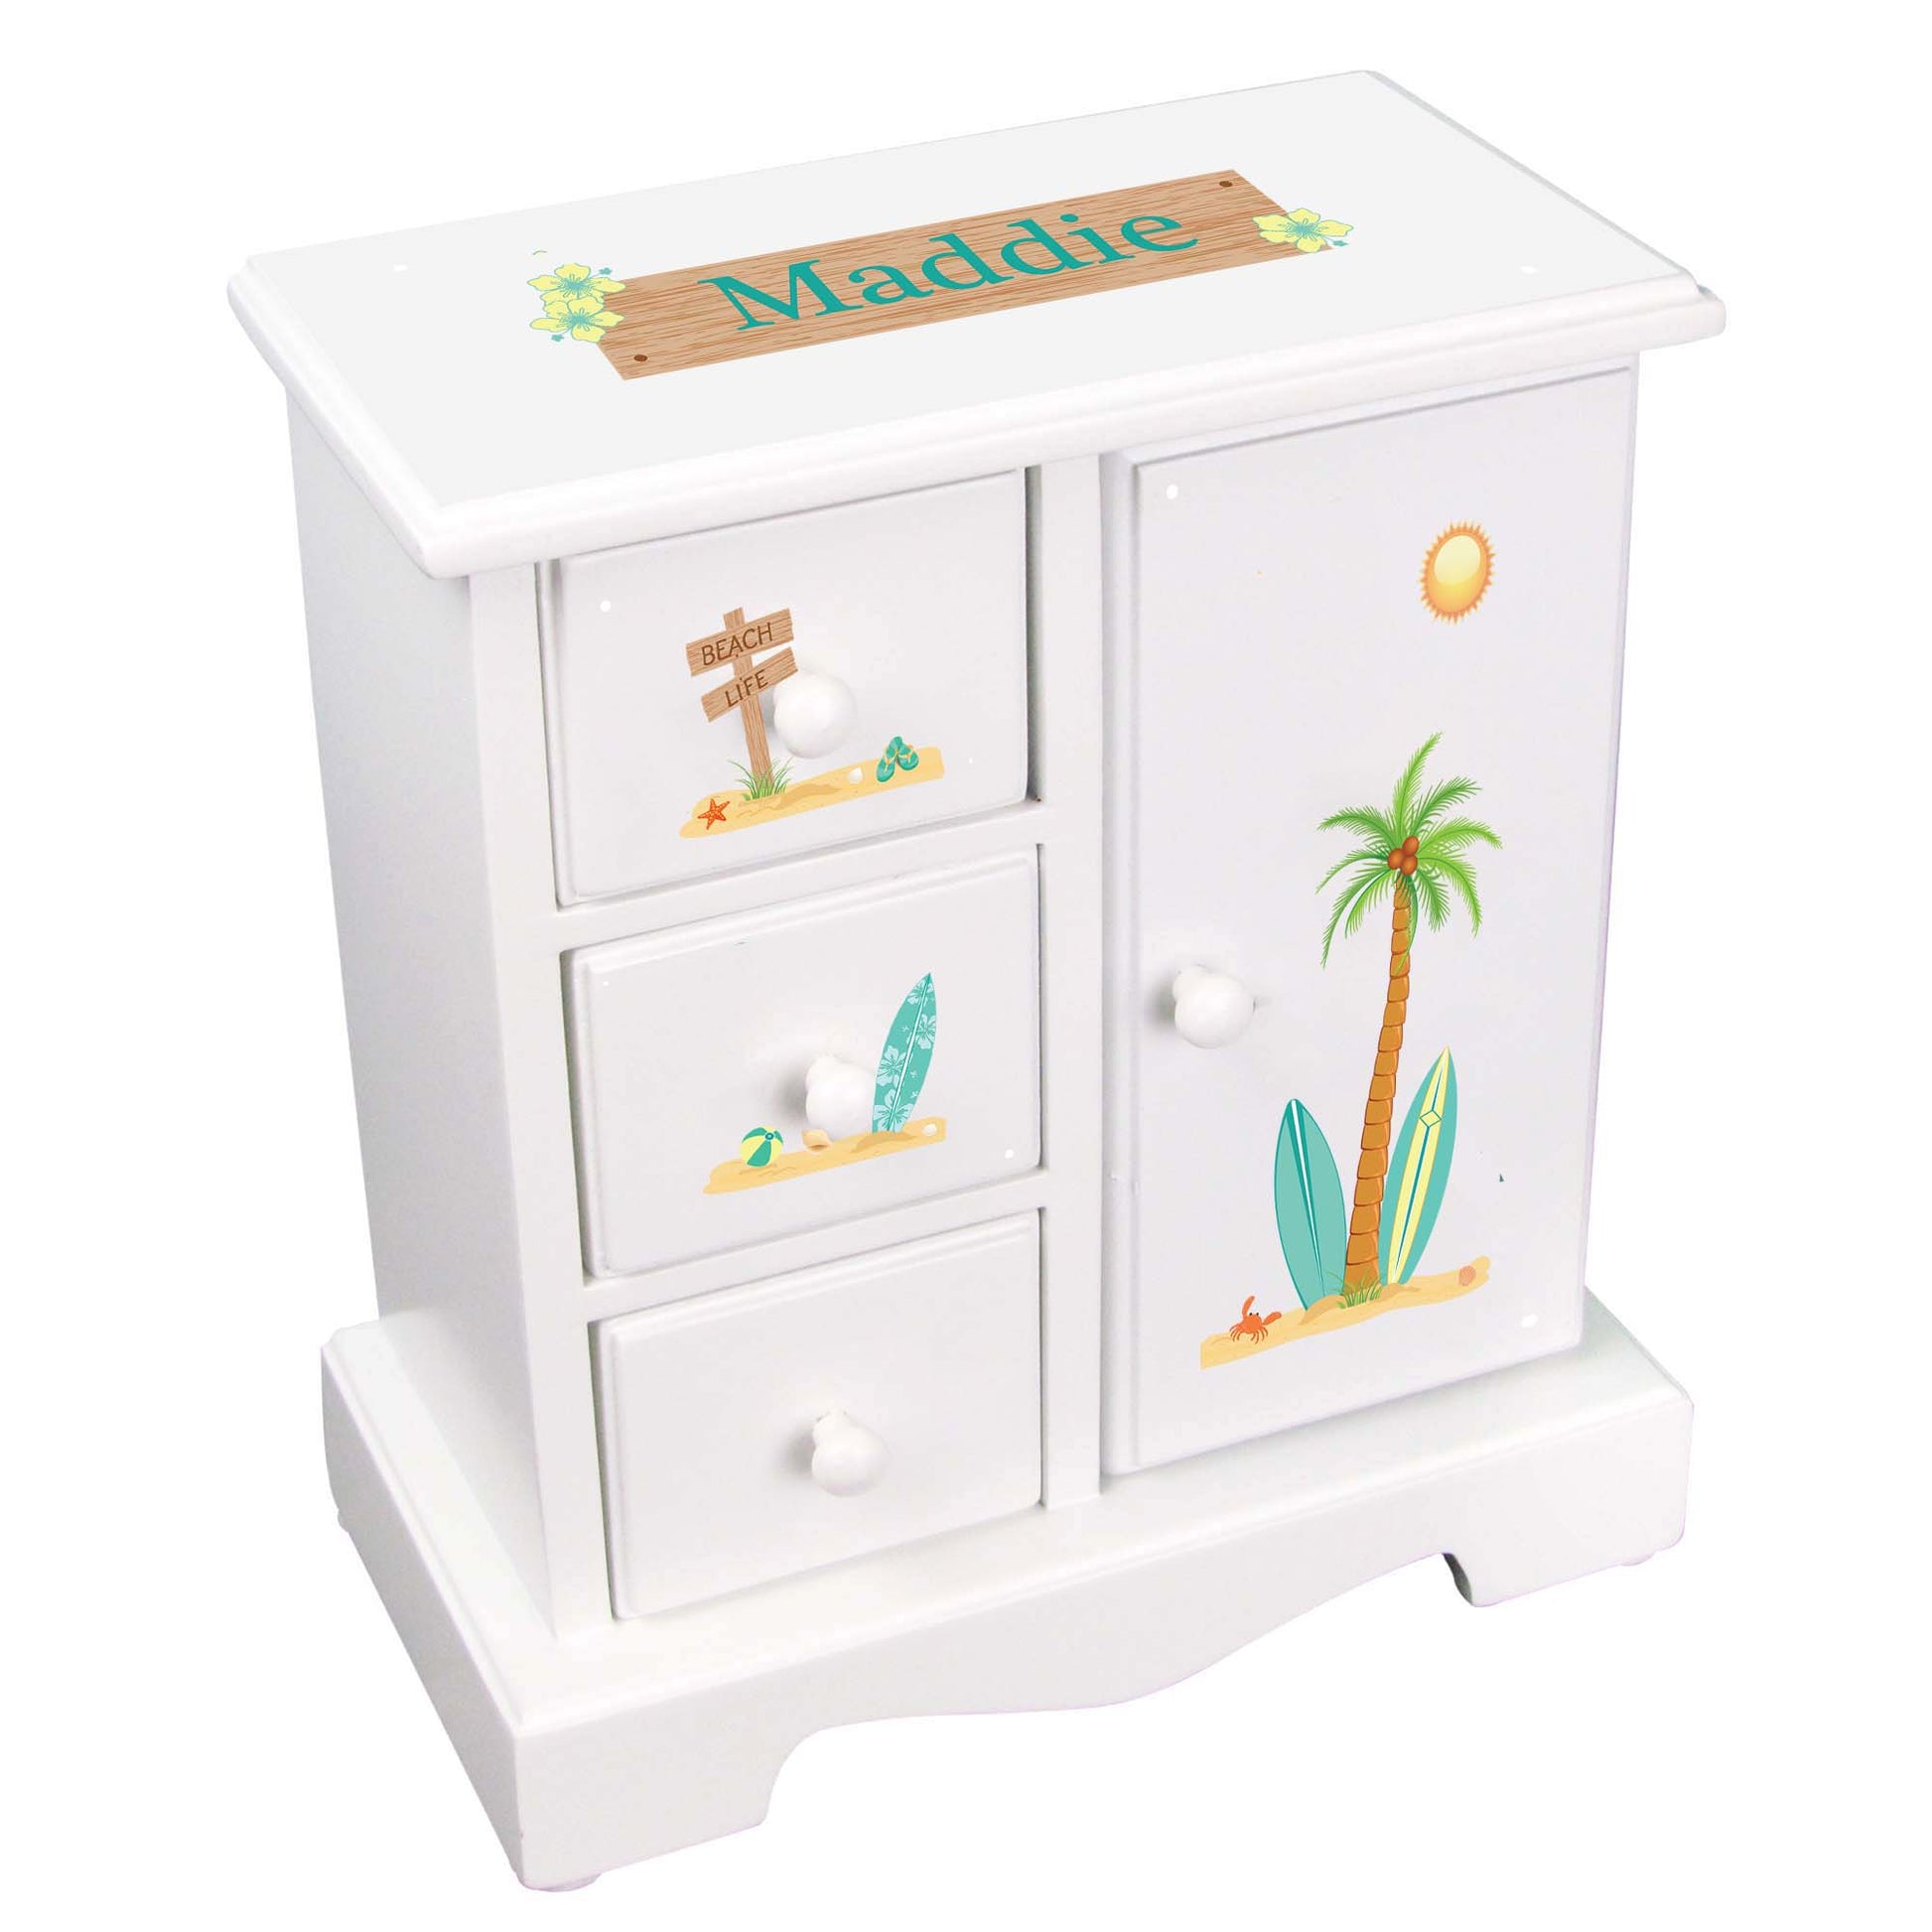 Personalized Jewelry Armoire surfer design